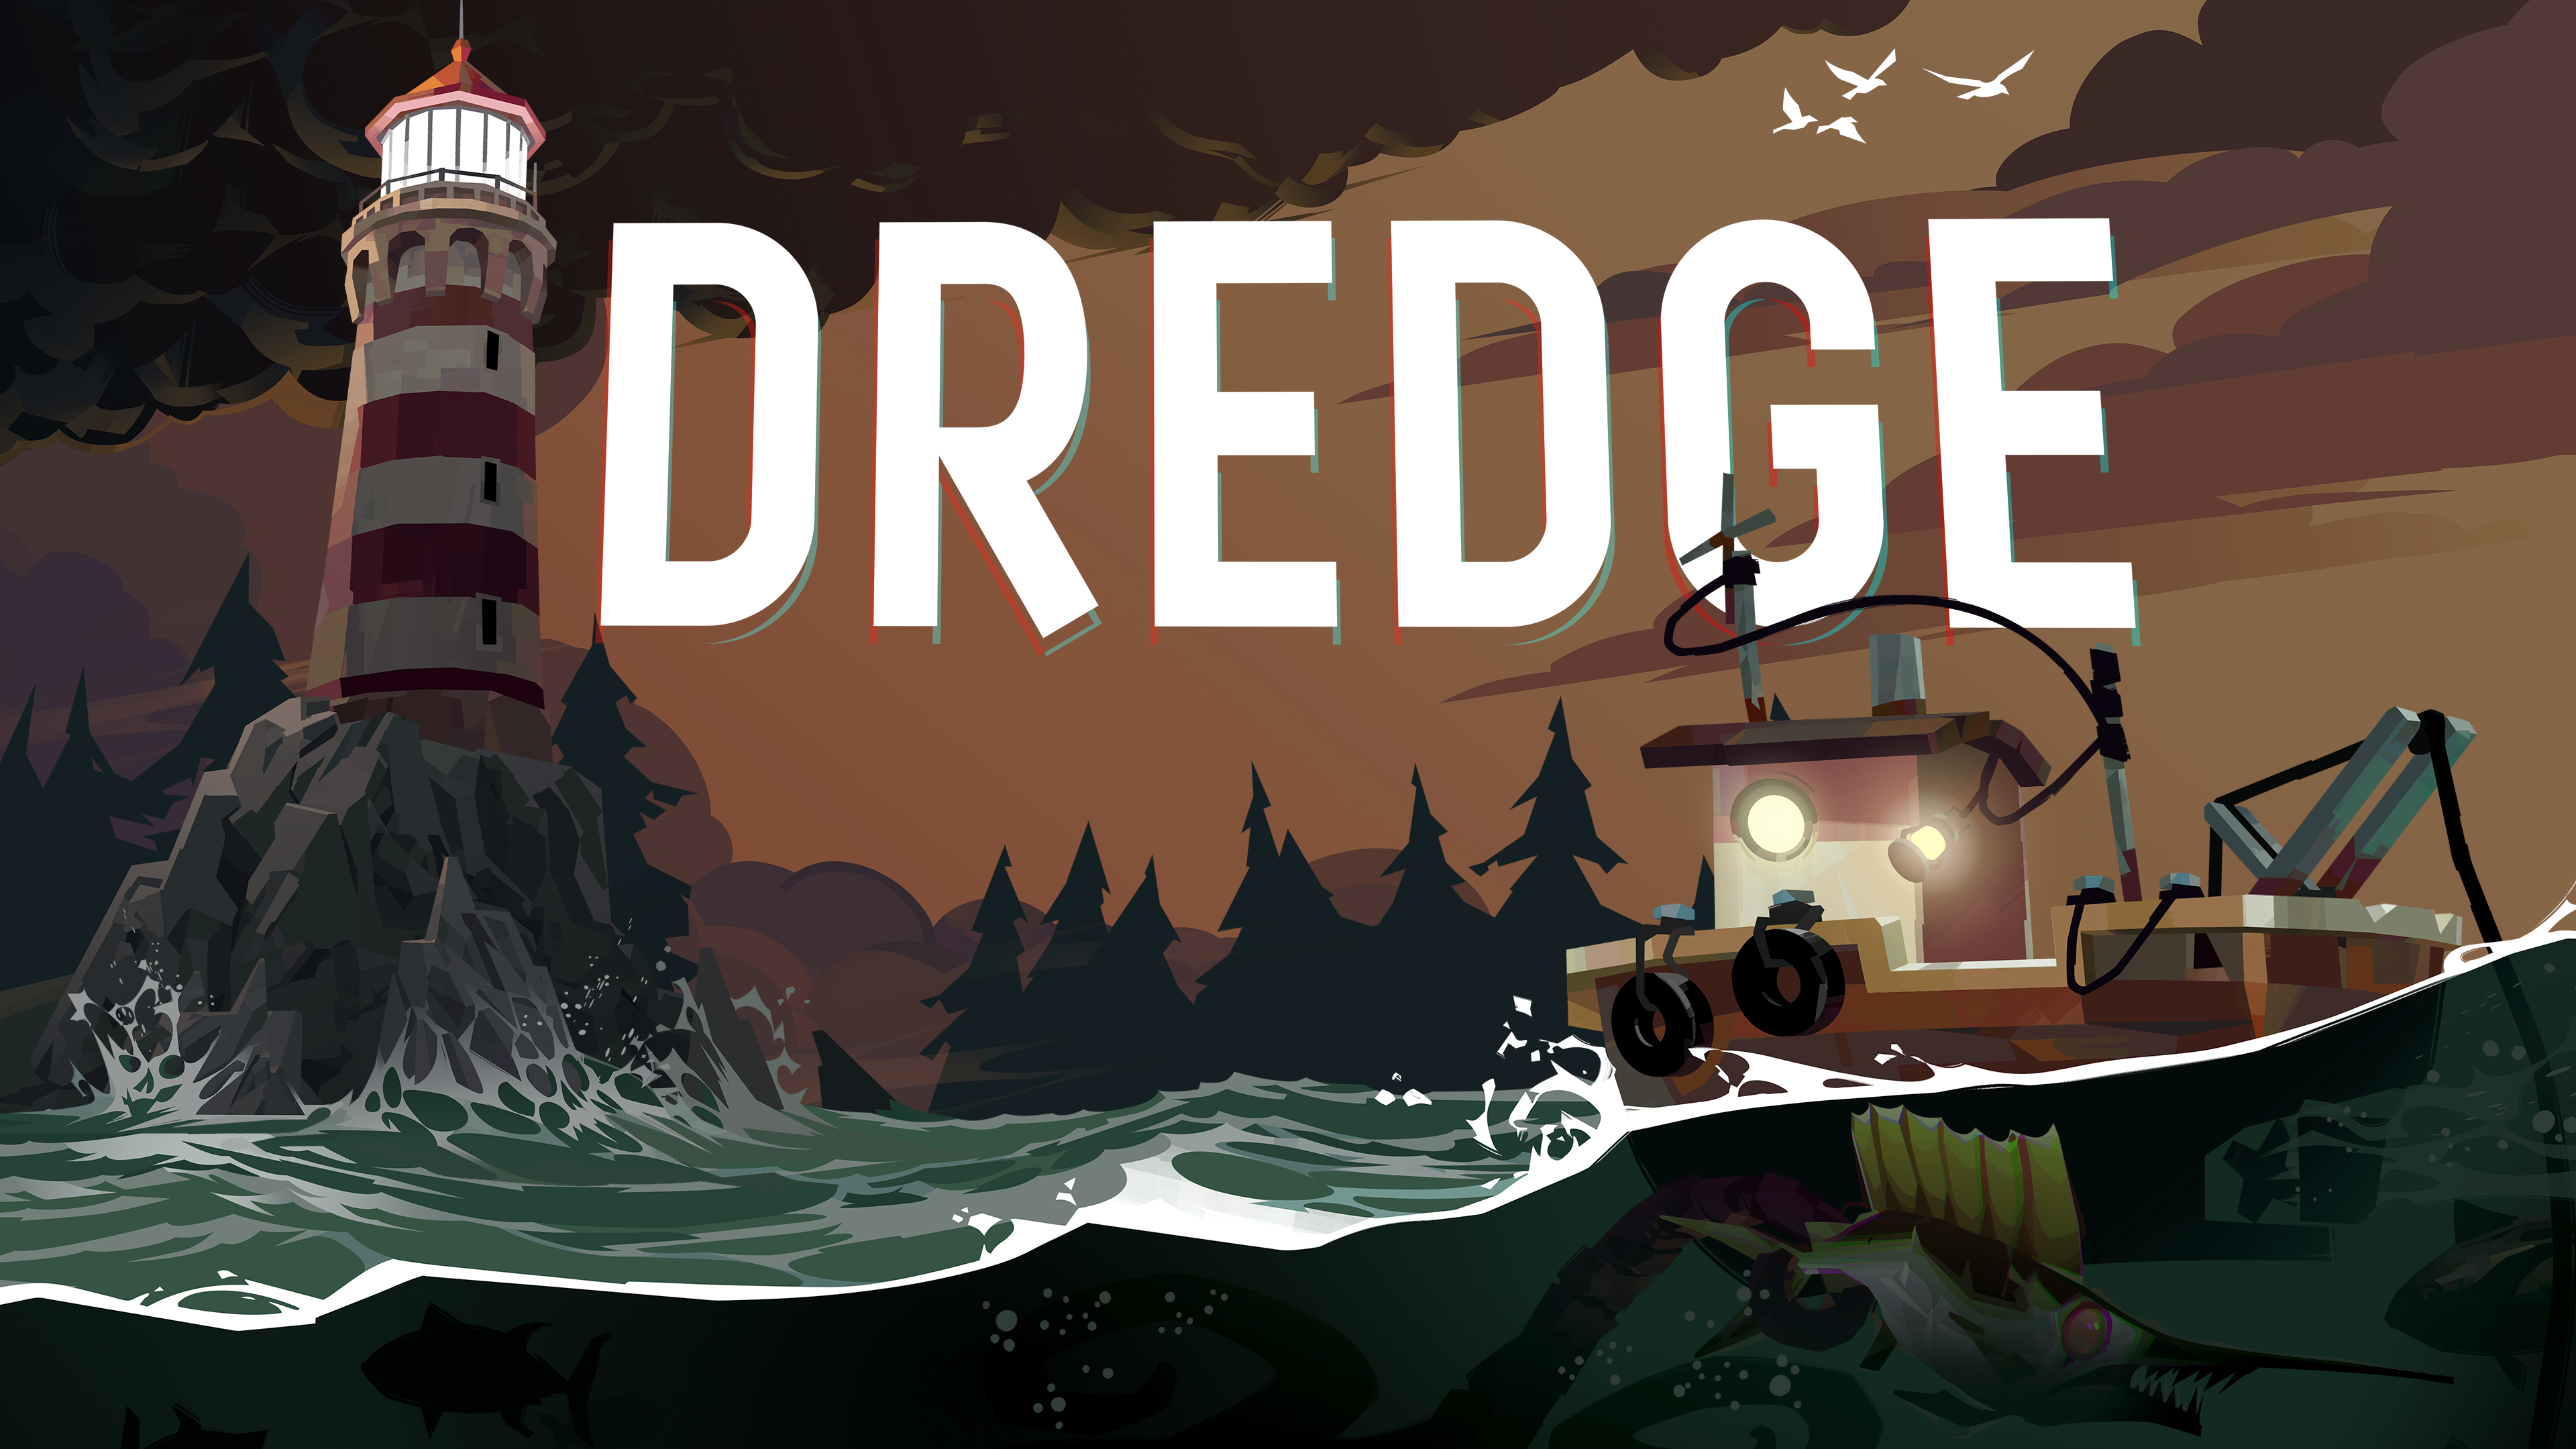 You can now try fishing game Dredge before you buy with this new Switch demo - Eurogamer.net (Picture 3)